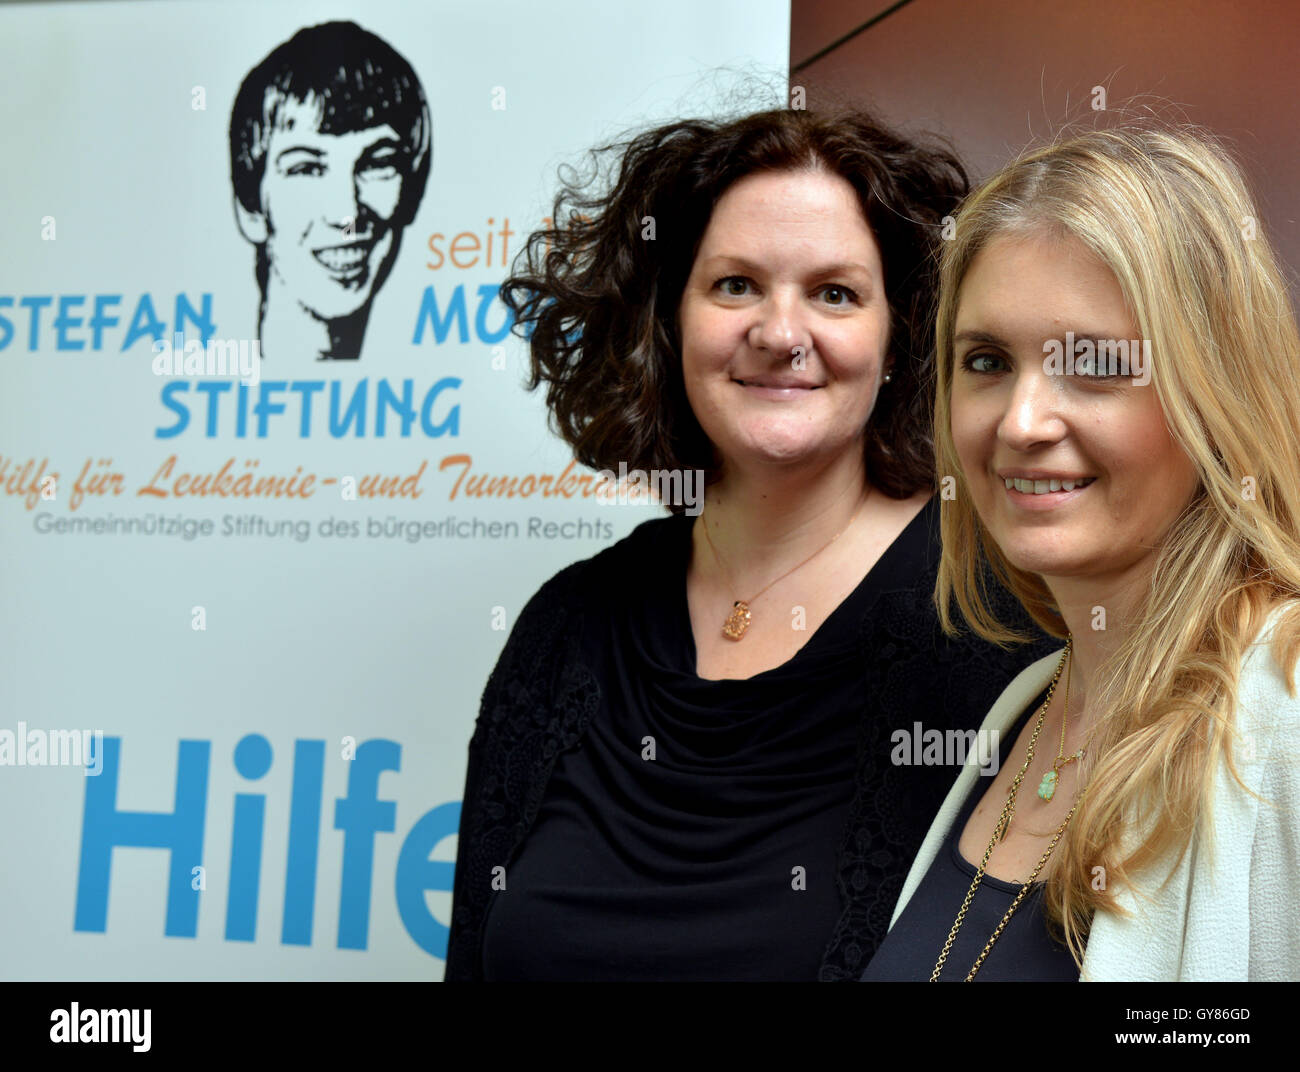 Birkenfeld, Germany. 17th Sep, 2016. Former model Felicity Gain (R) from London and Siobhan Kirsten Mansfield pose in front of a poster from the Stefan Morsch Foundation in Birkenfeld, Germany, 17 September 2016. In 2002, 44-year-old Mansfield from Trassem, Germany donated bone marrow for Felicity Gain, now 38, which saved her life. Phoot: HARALD TITTEL/dpa/Alamy Live News Stock Photo